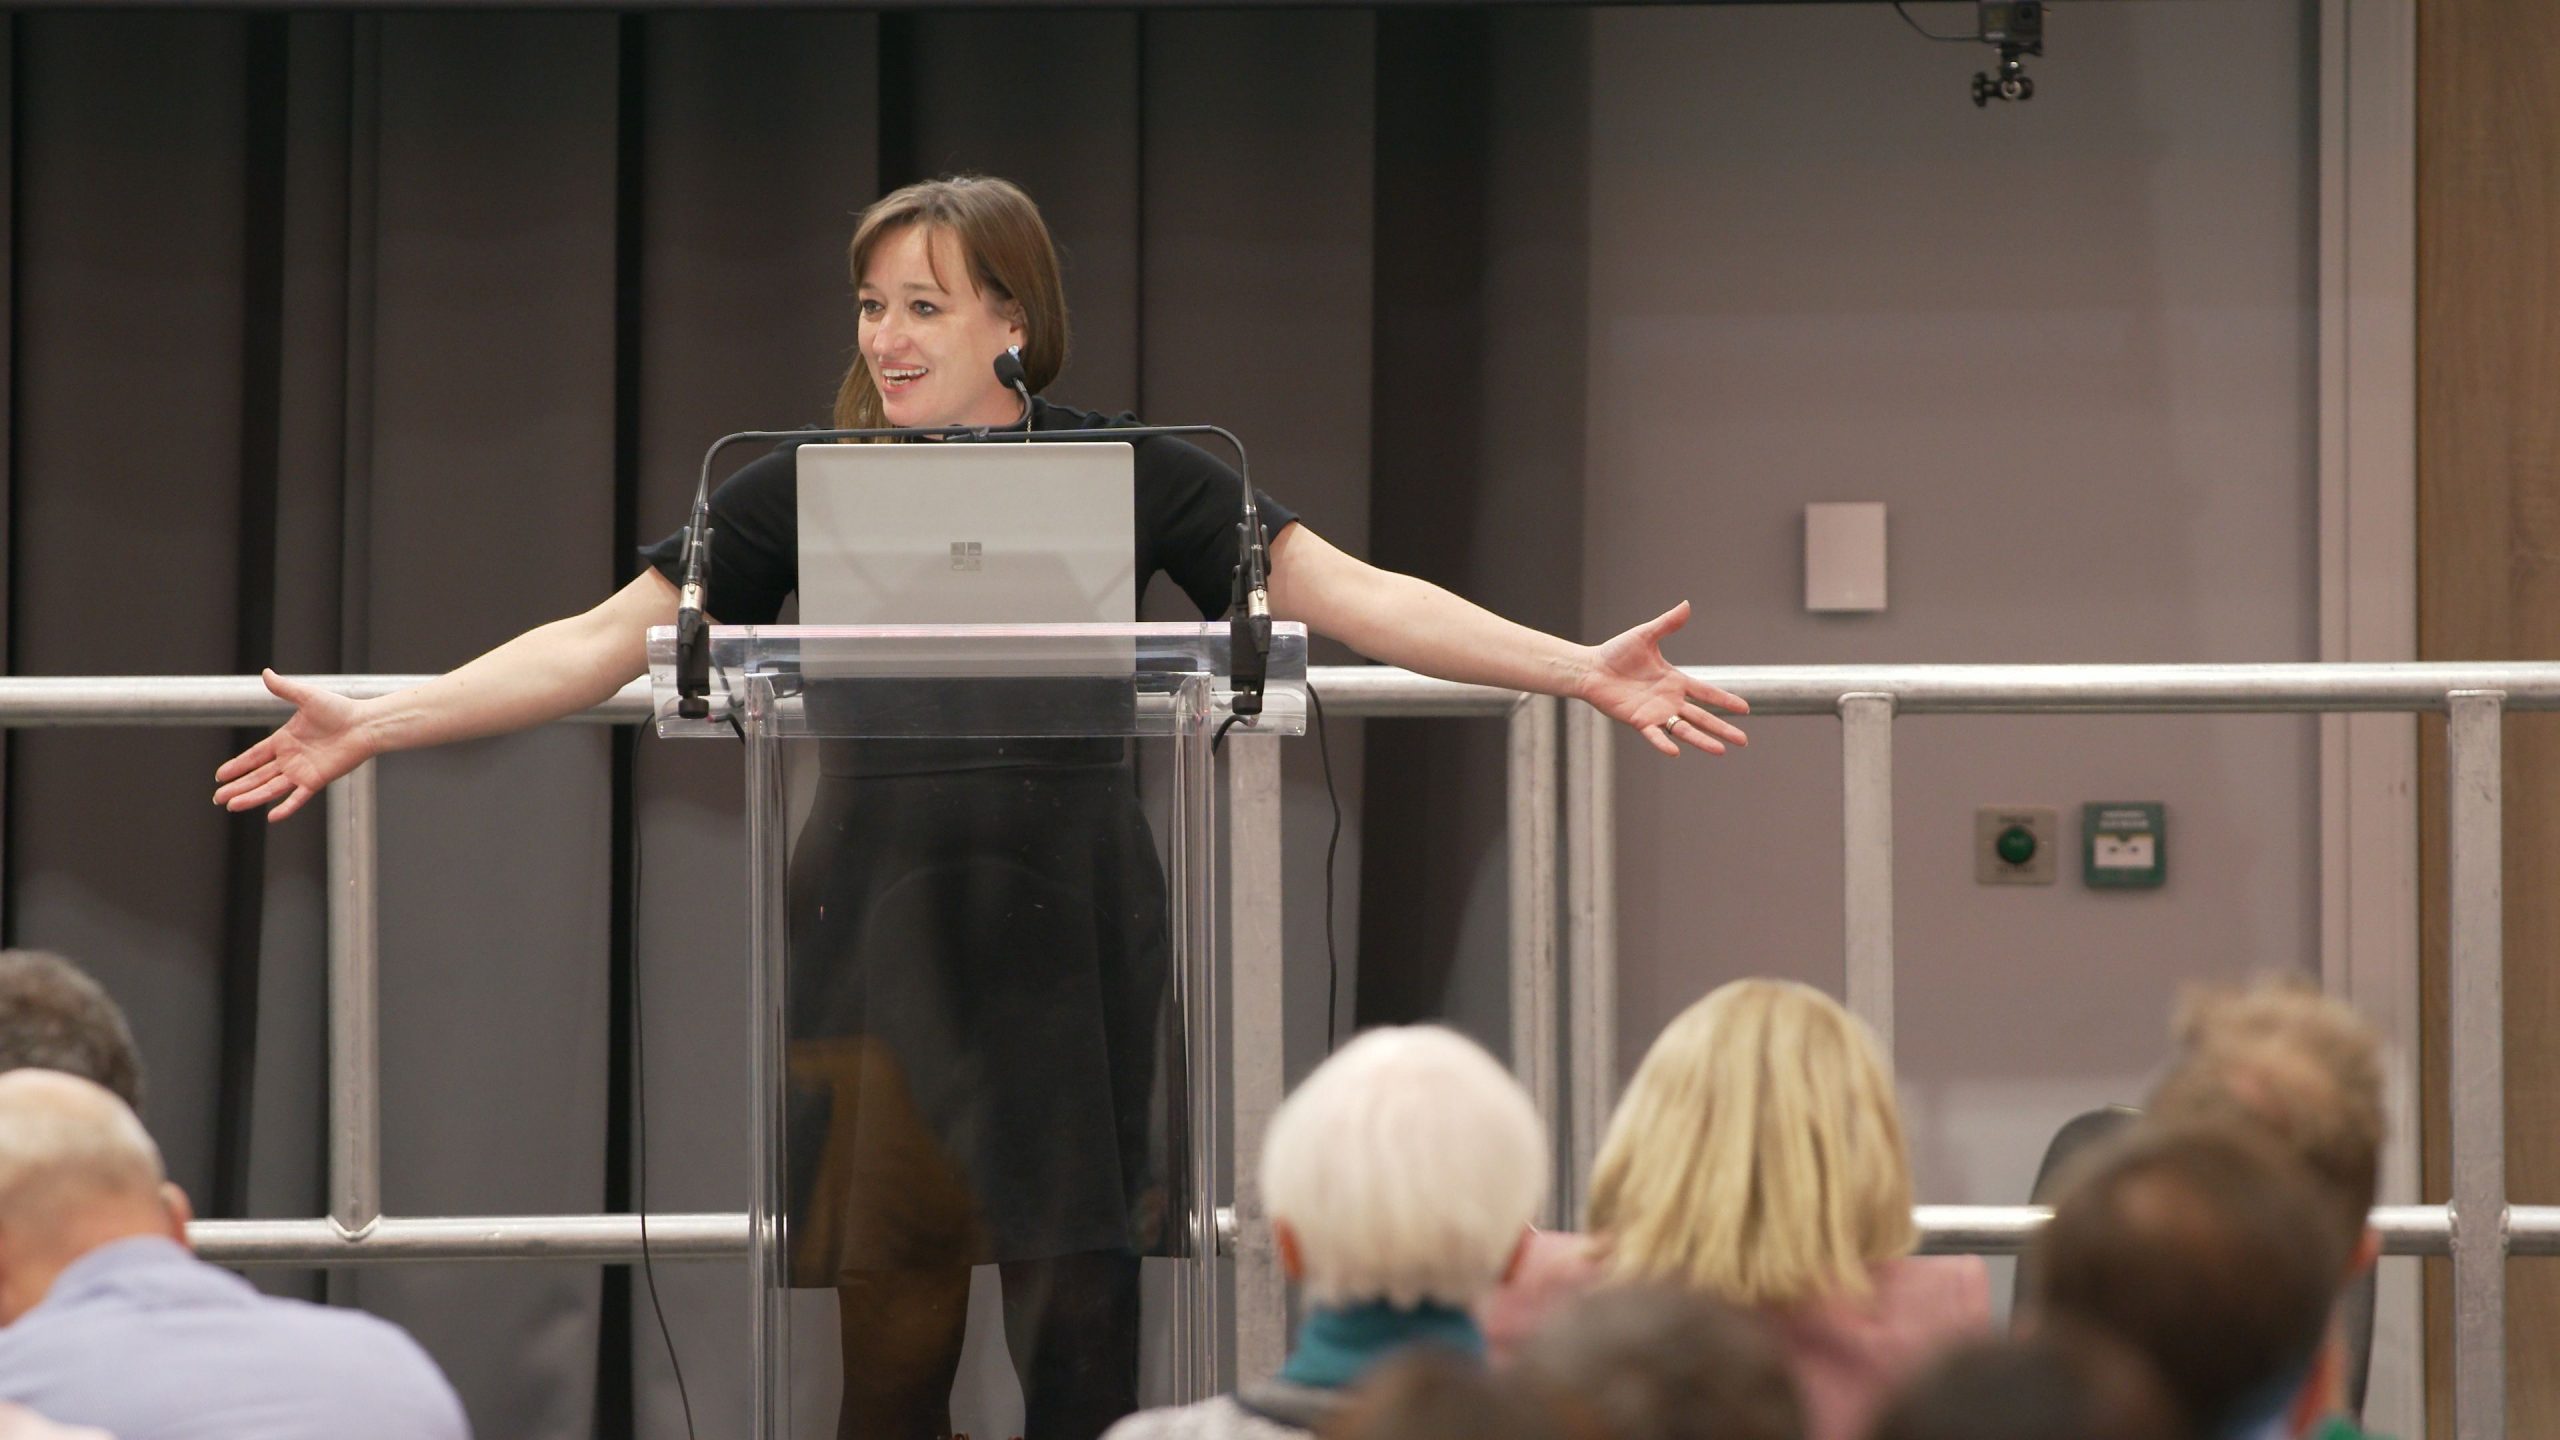 Emily Cherry stands behind a lectern on stage, with her arms open wide